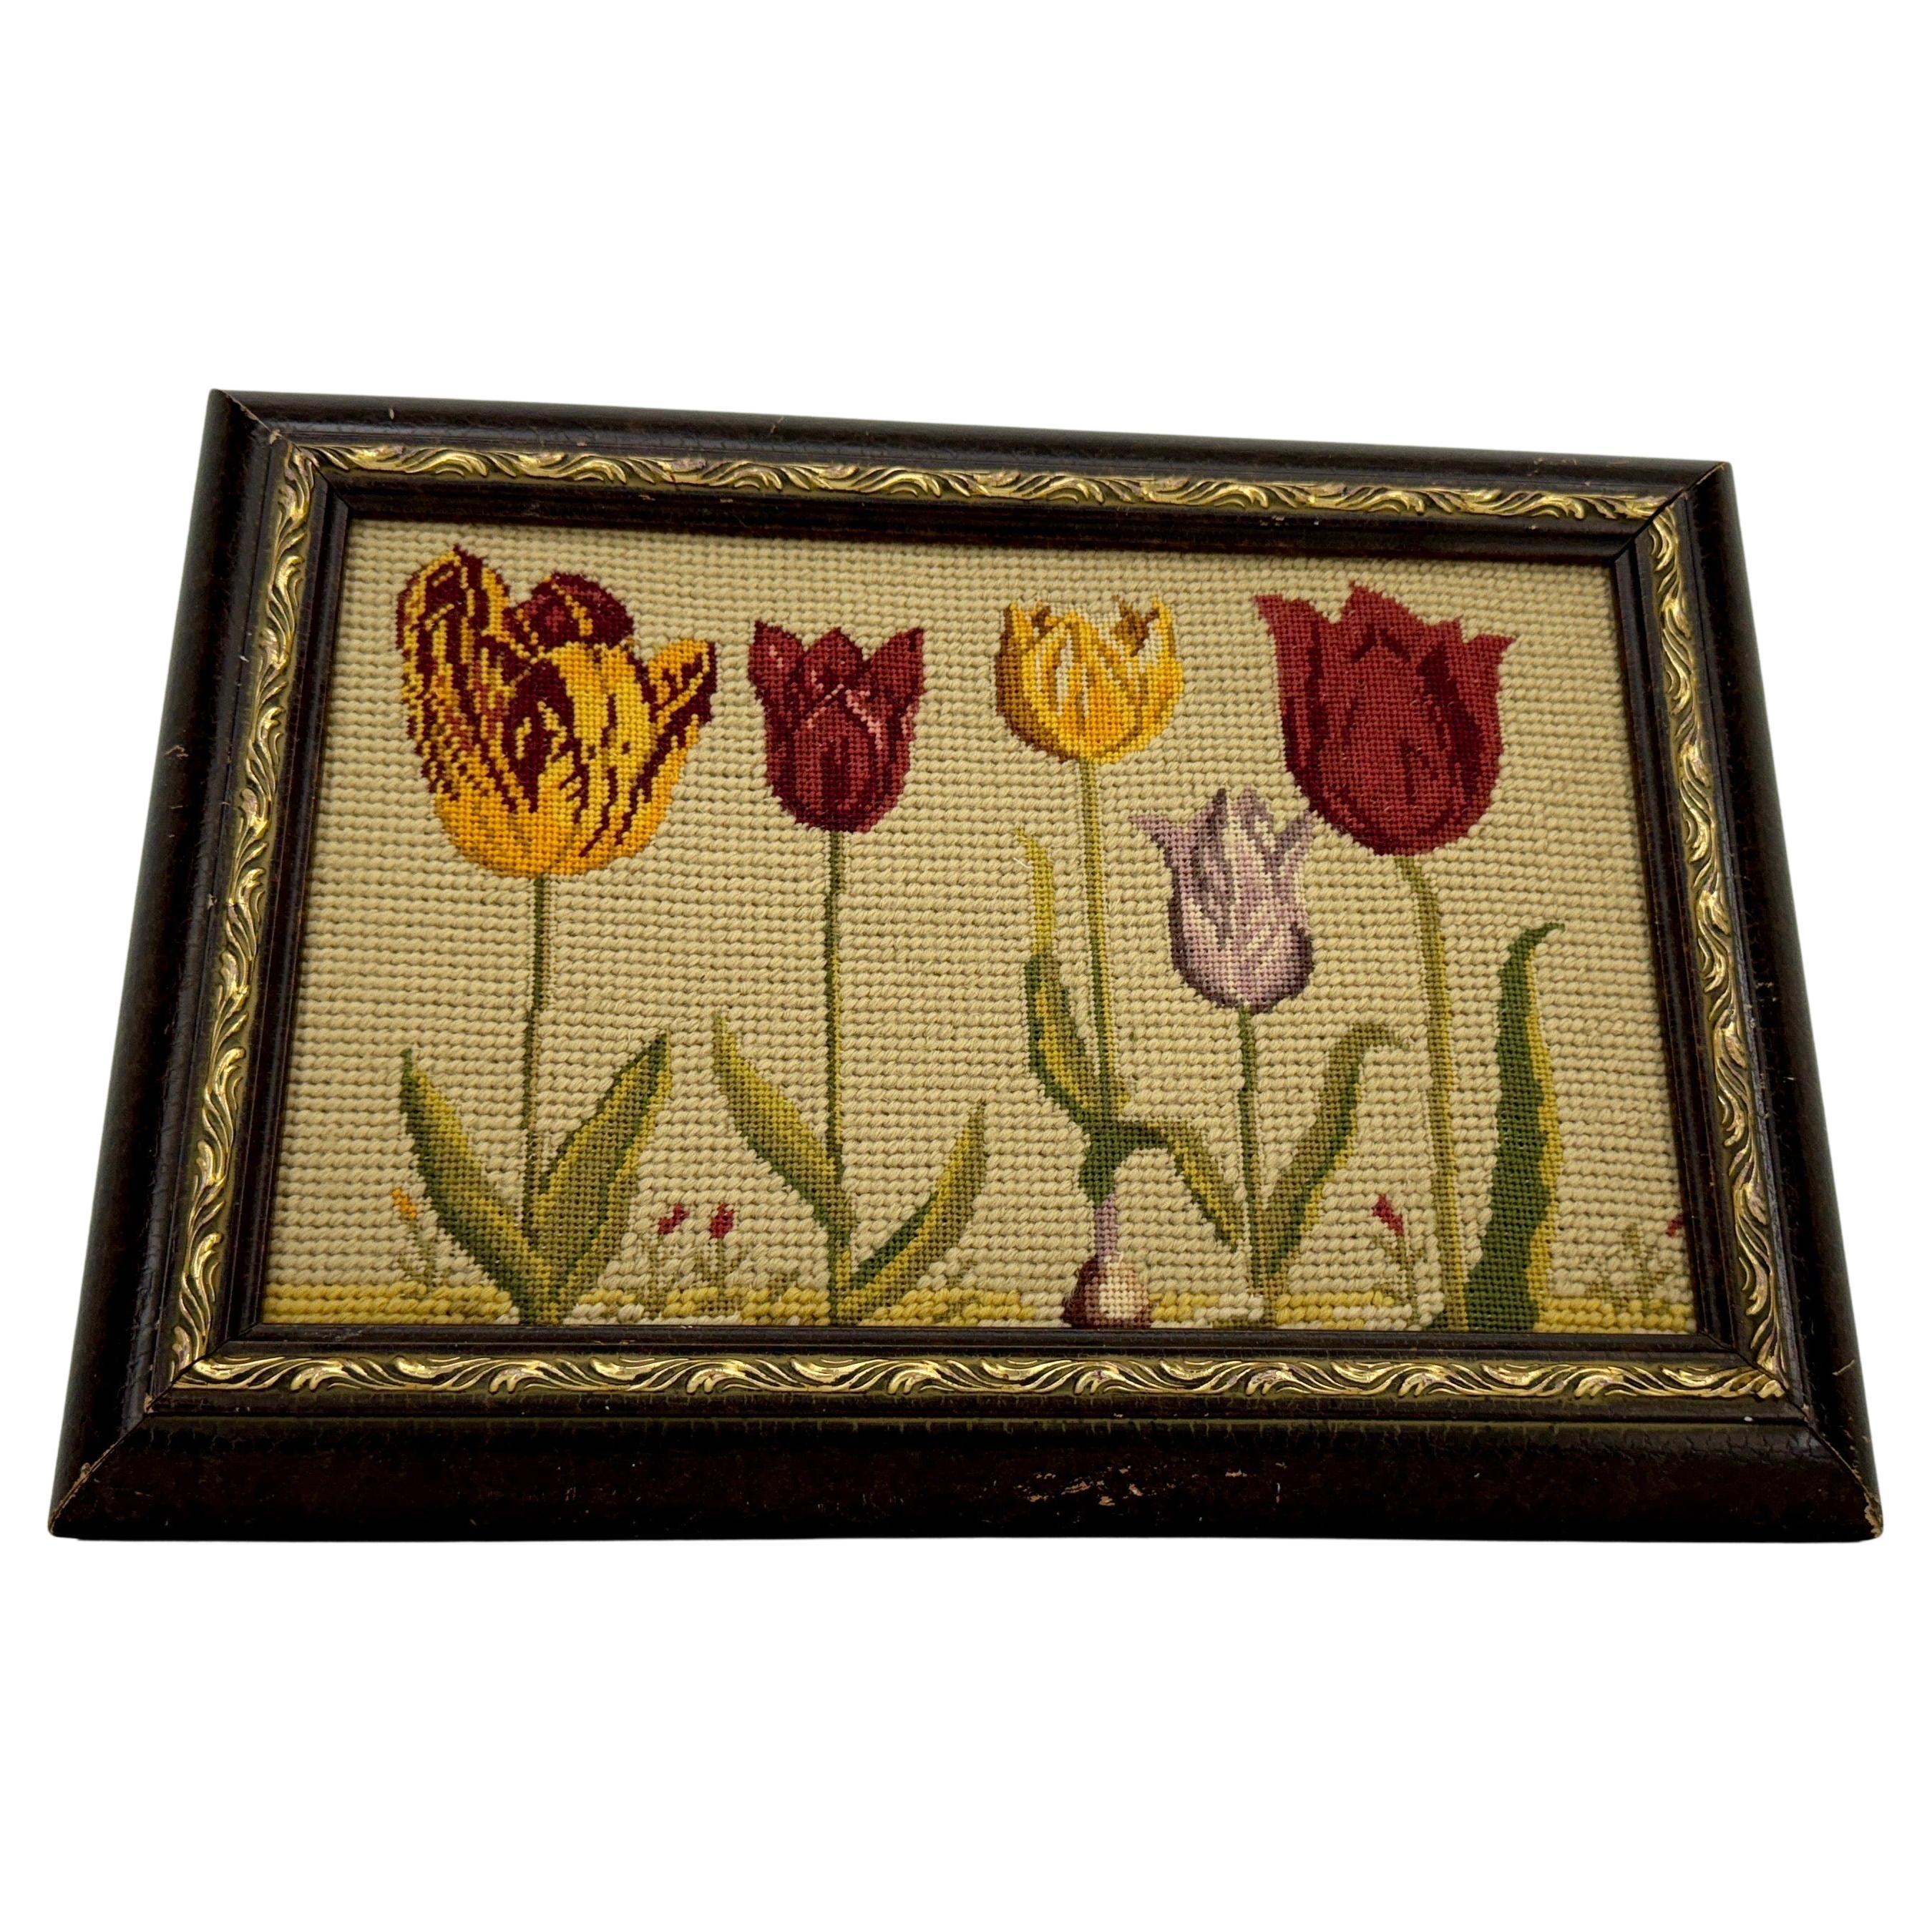 Needlepoint Wood Framed Artwork of Tulips from Chelsea Textiles

One-of-a-kind needlepoint artwork from Chelsea Textiles. This framed artwork features tulips in rust, orange, yellow and green colors. This classic piece of art would make a suitable